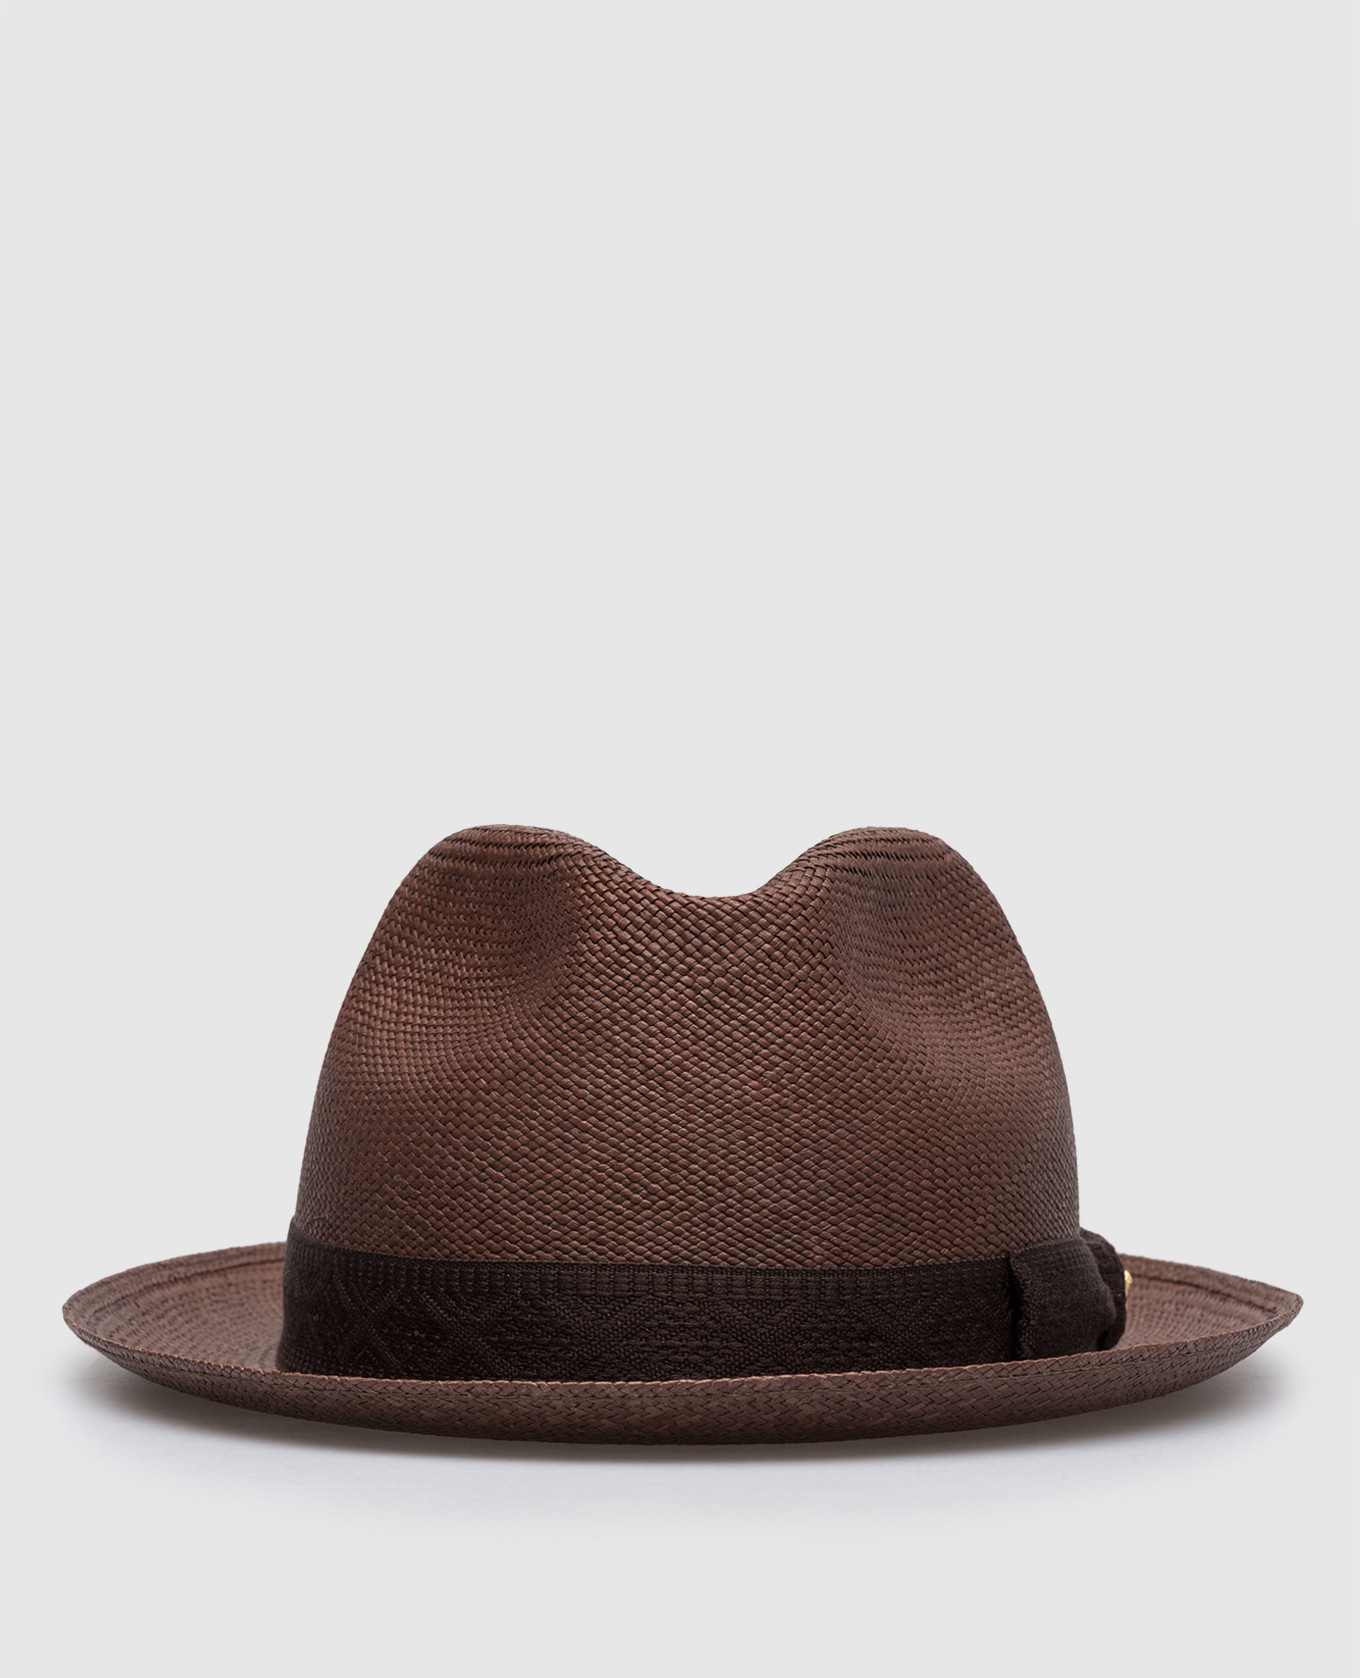 Brown straw hat with eagle head logo